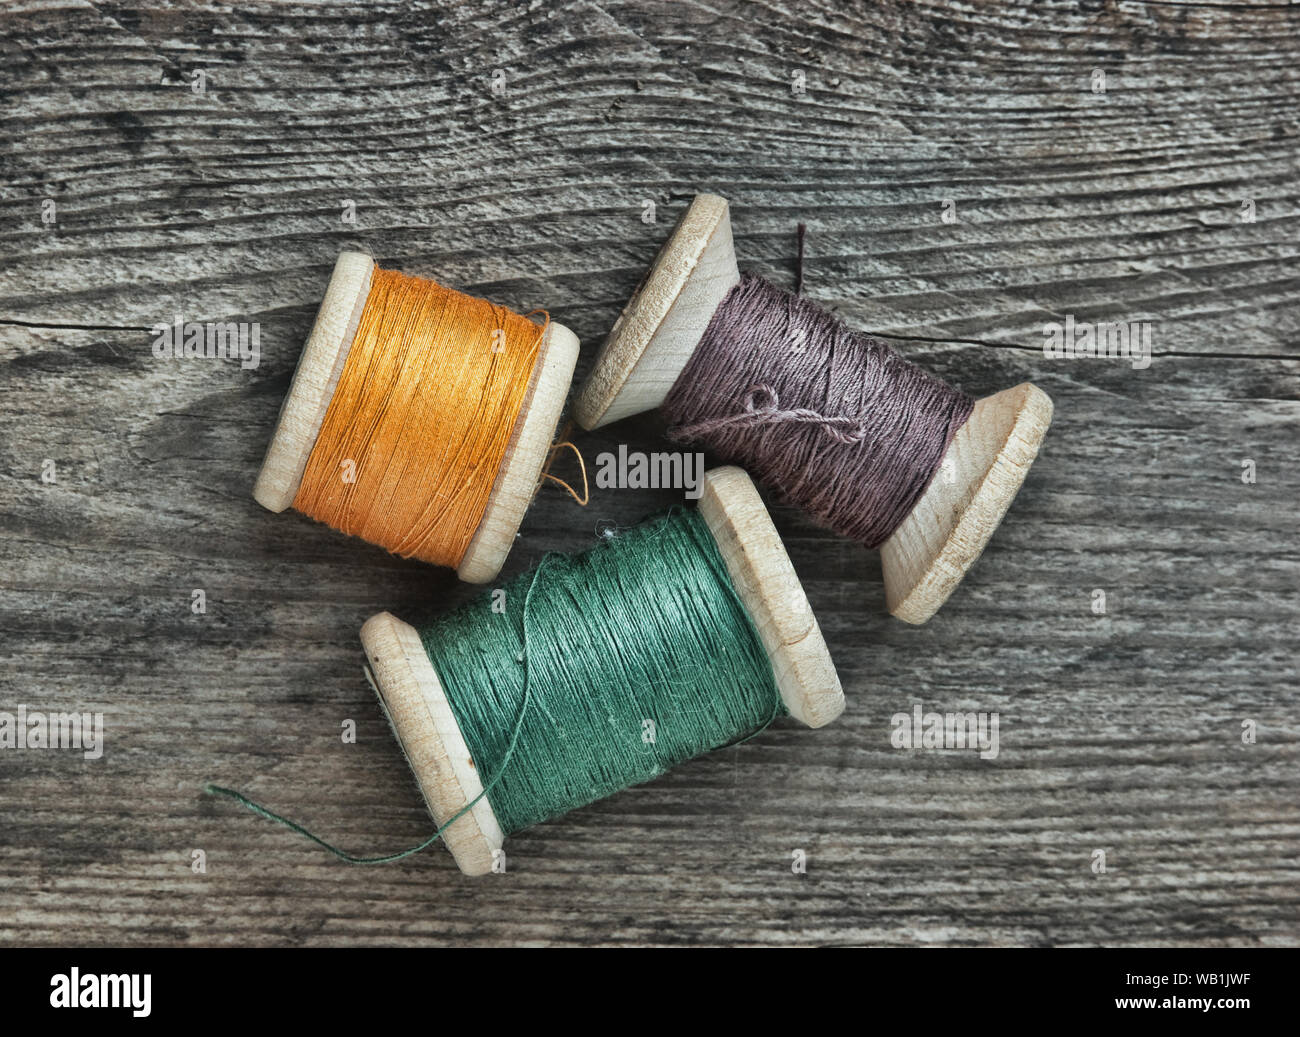 Still Life Of Spools Of Thread On A Wooden Background Stock Photo